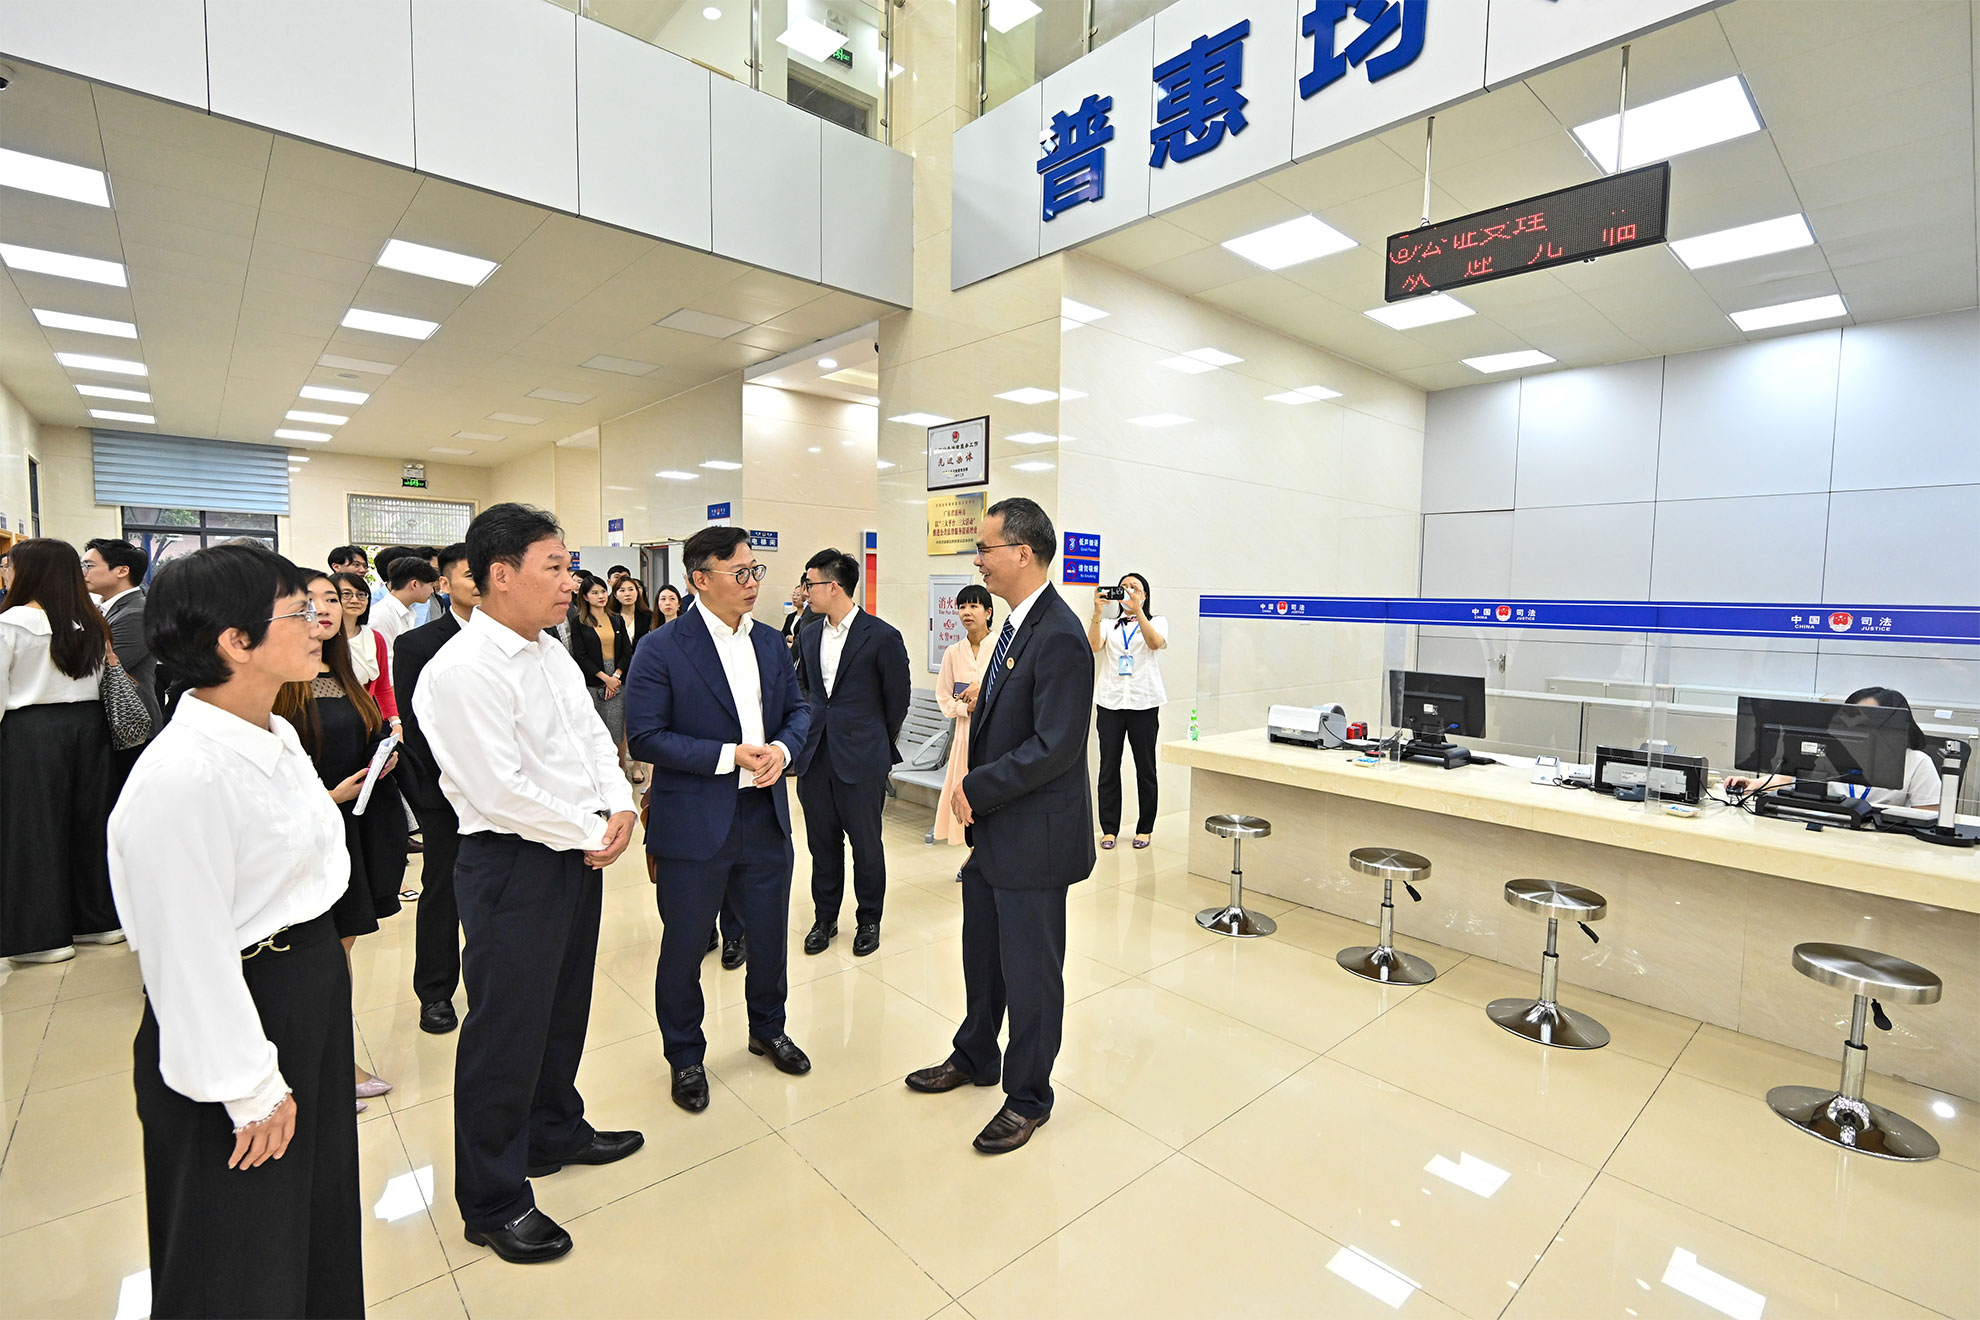 The Deputy Secretary for Justice, Mr Cheung Kwok-kwan, led a delegation comprising young lawyers and law students to visit the Public Legal Service Center of Huizhou today (September 7). Photo shows Mr Cheung (third left) being briefed on the work of the center.